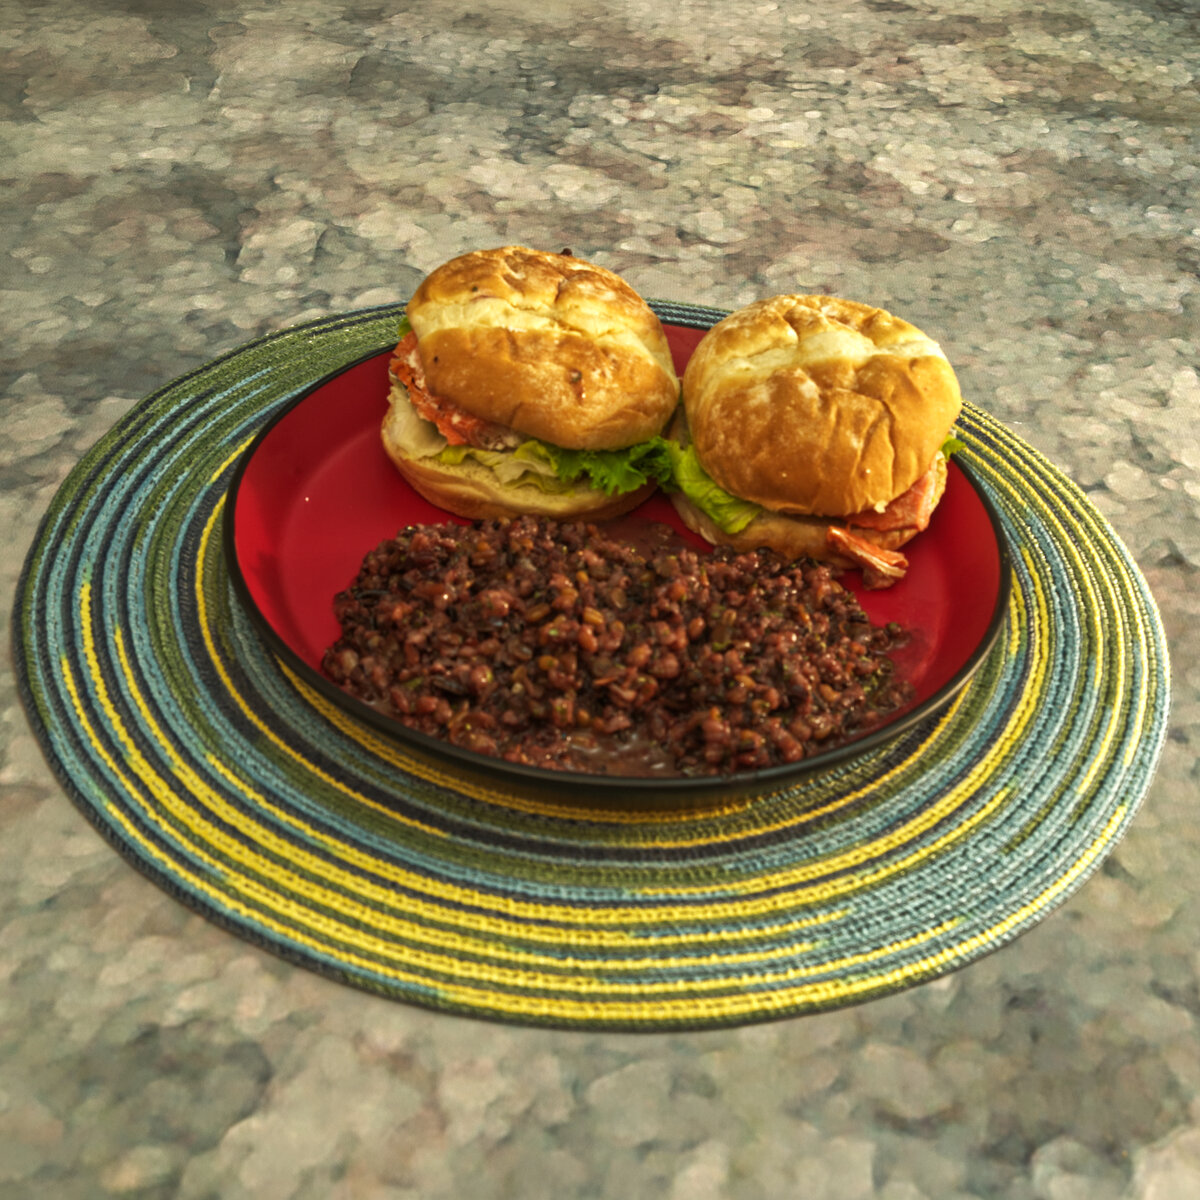 Salmon Sandwiches with Black Rice and Lentils